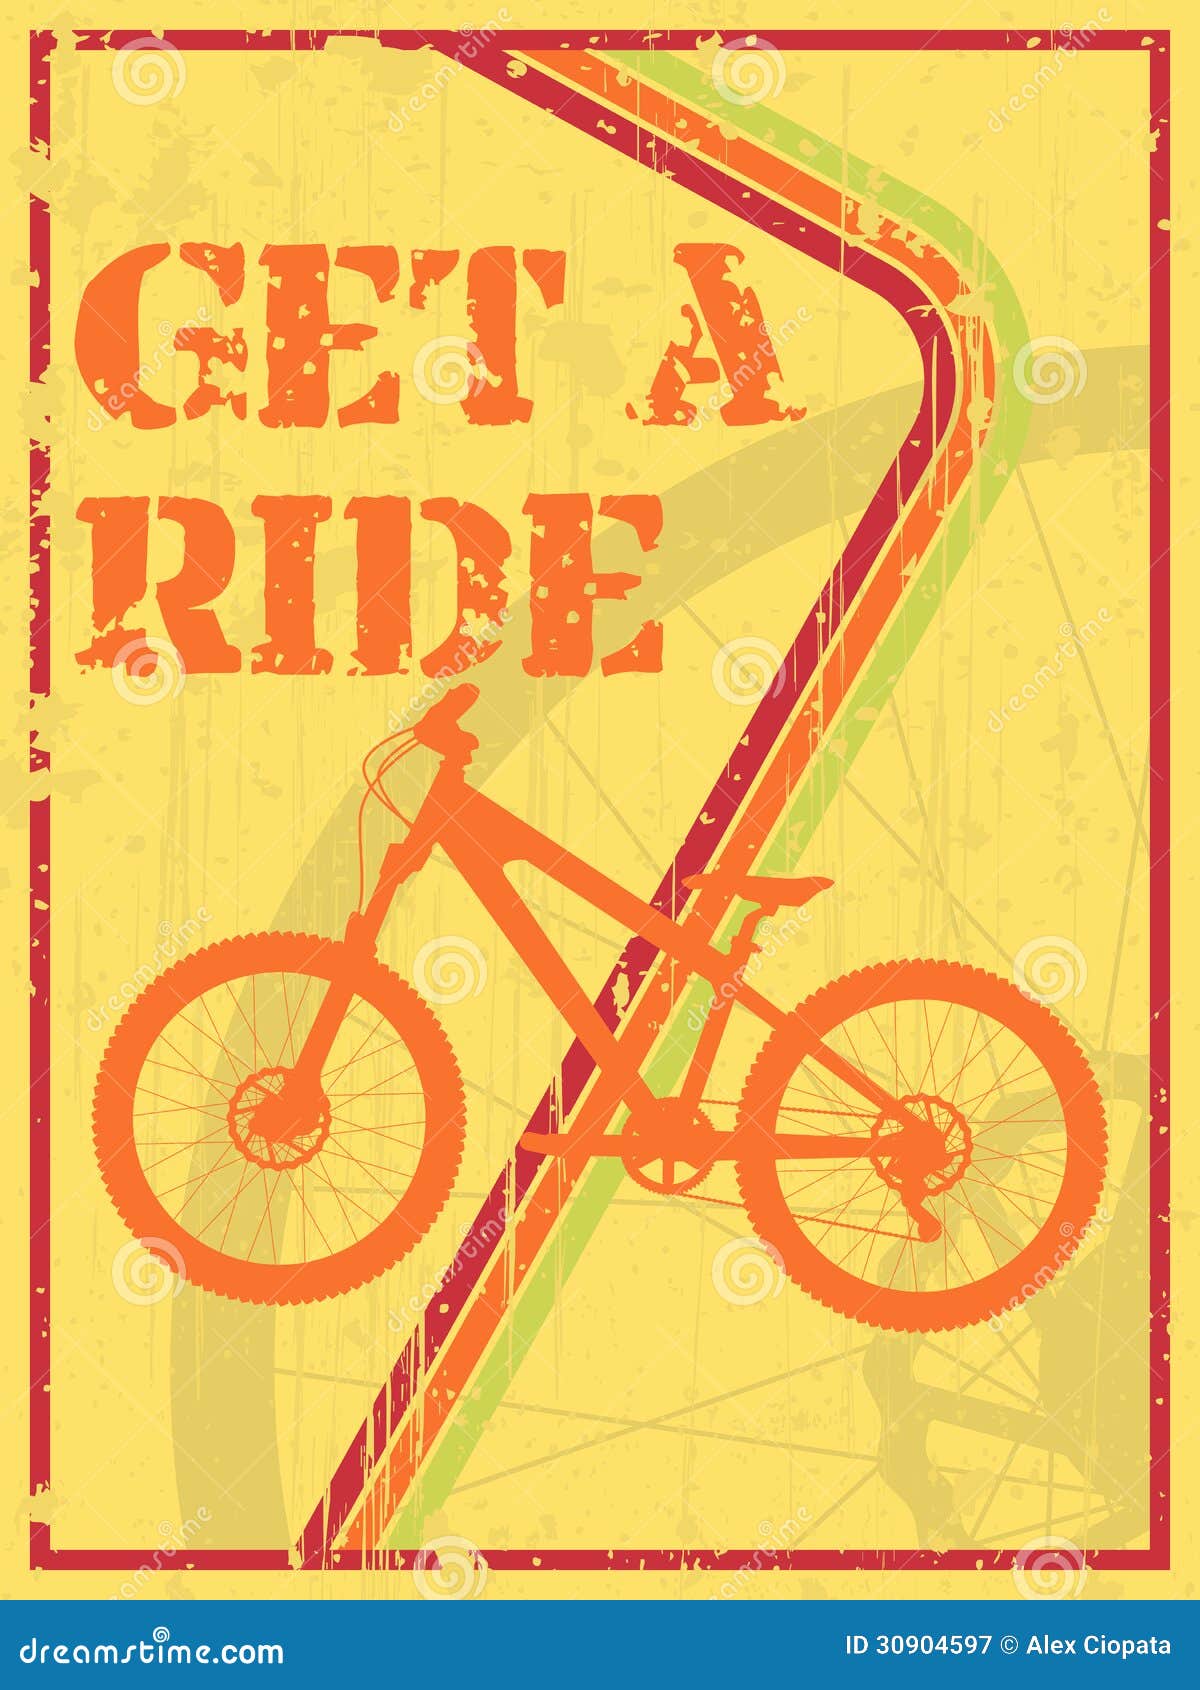 Get A Ride Abstract Grunge Poster Bike Silhouette Text